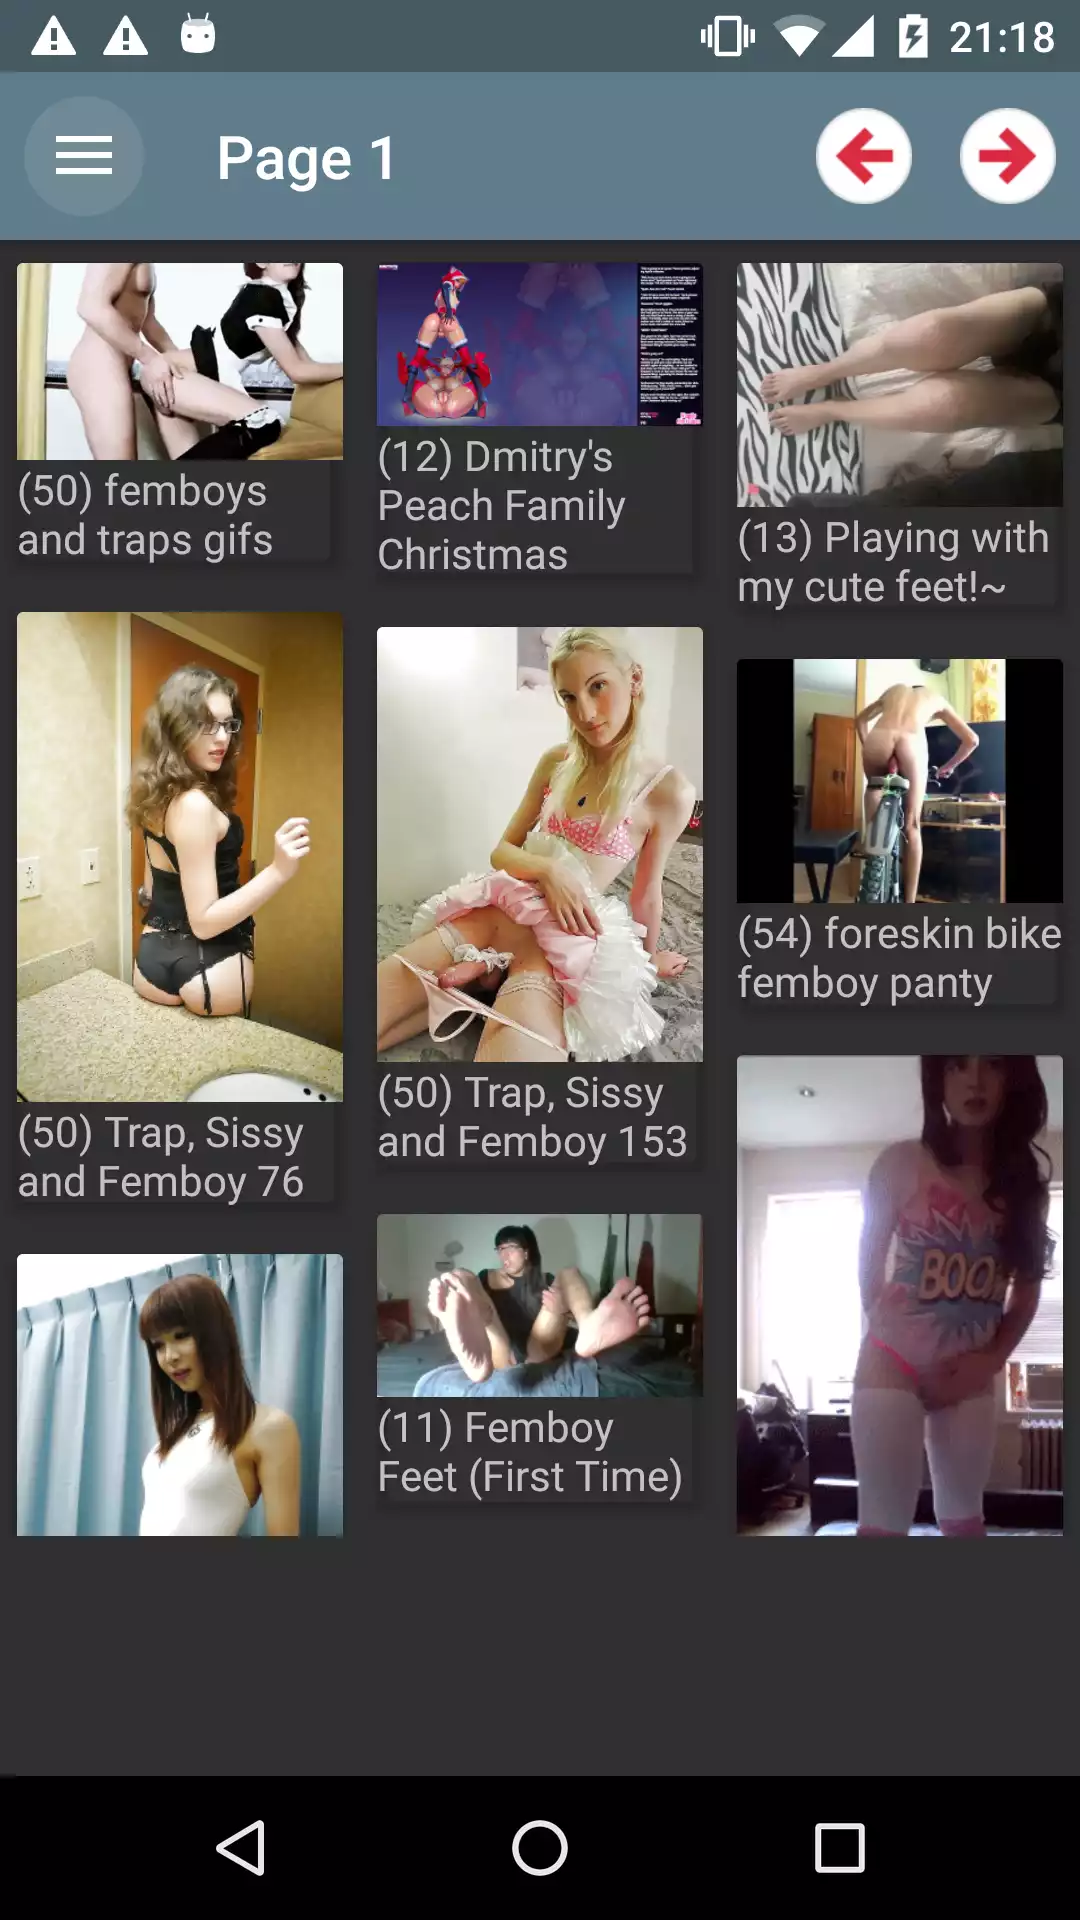 Femboy Galleries hentai,texas,apk,adult,pics,hot,and,panties,download,apps,photos,for,puzzle,pornstar,cuckhold,photo,images,wallpaper,manga,app,android,sexy,porn,with,galleries,alexis